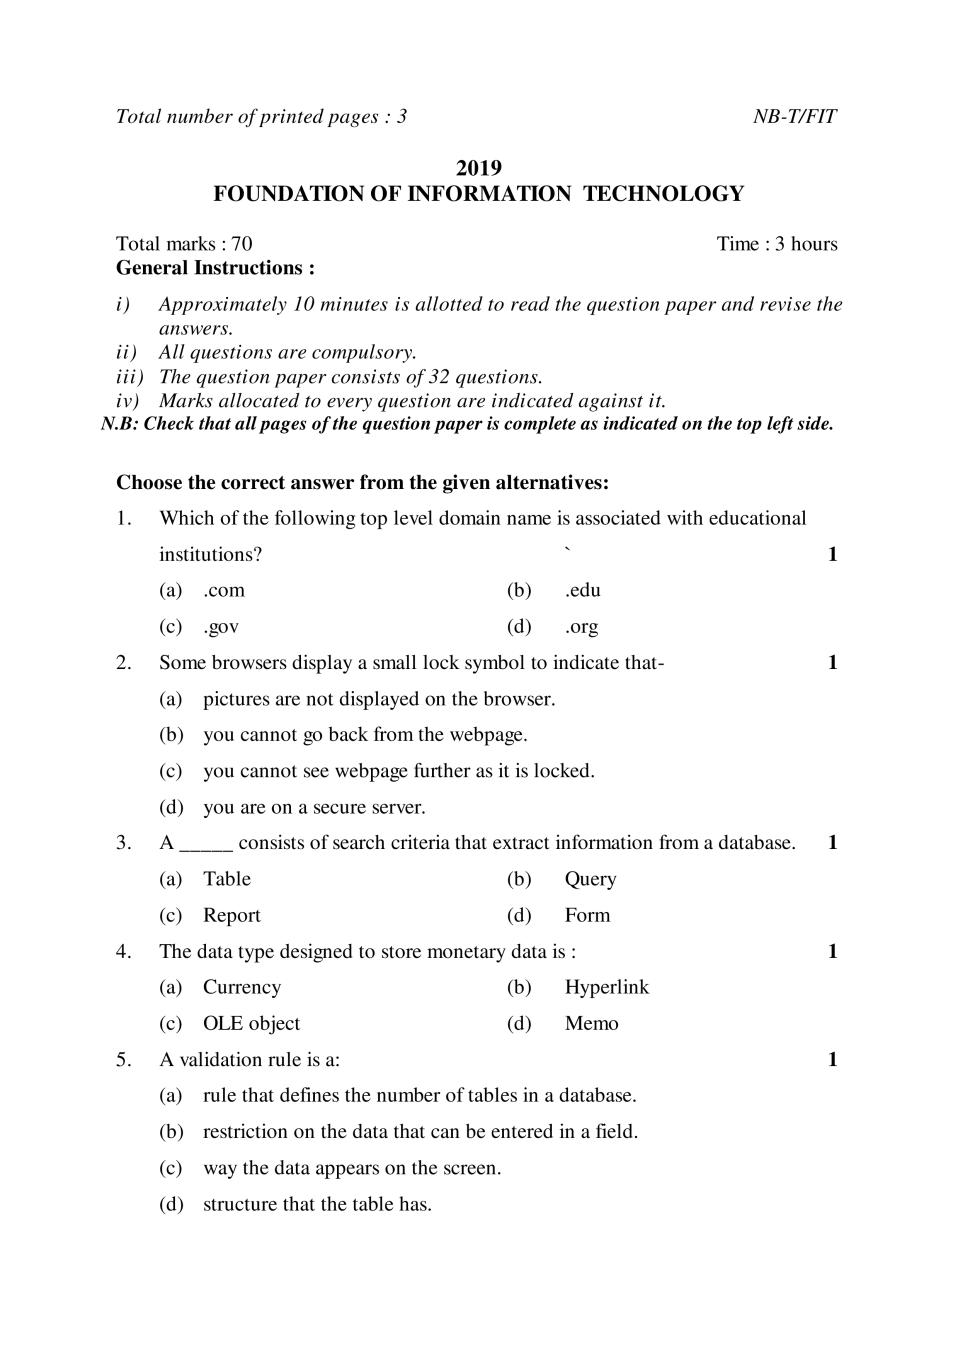 NBSE Class 10 Question Paper 2019 for Foundation Of information Technology - Page 1